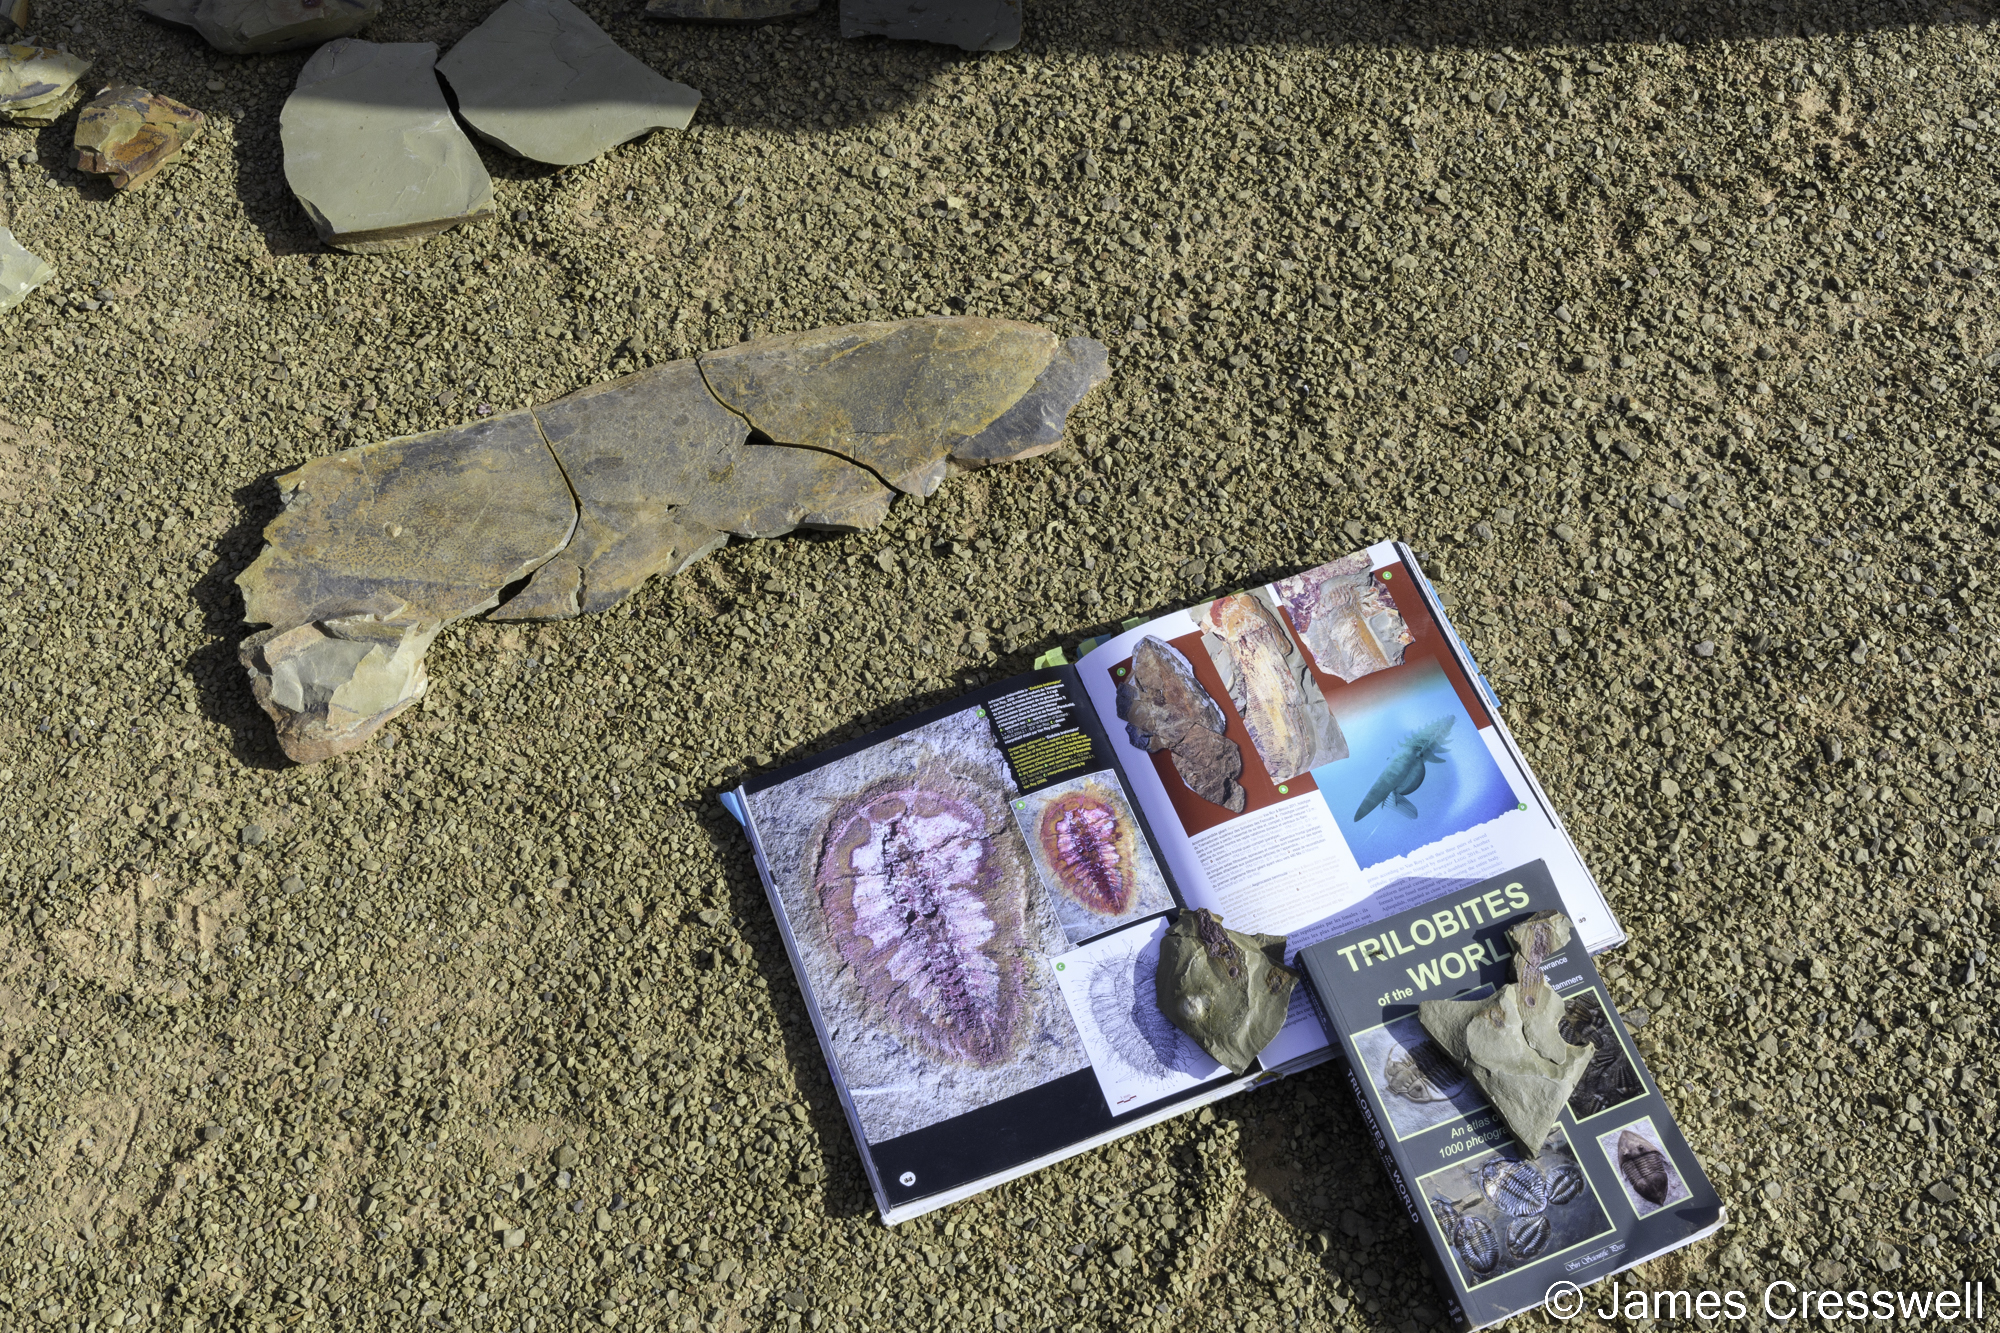 A photograph of real fossils compared to their pictures in an open book